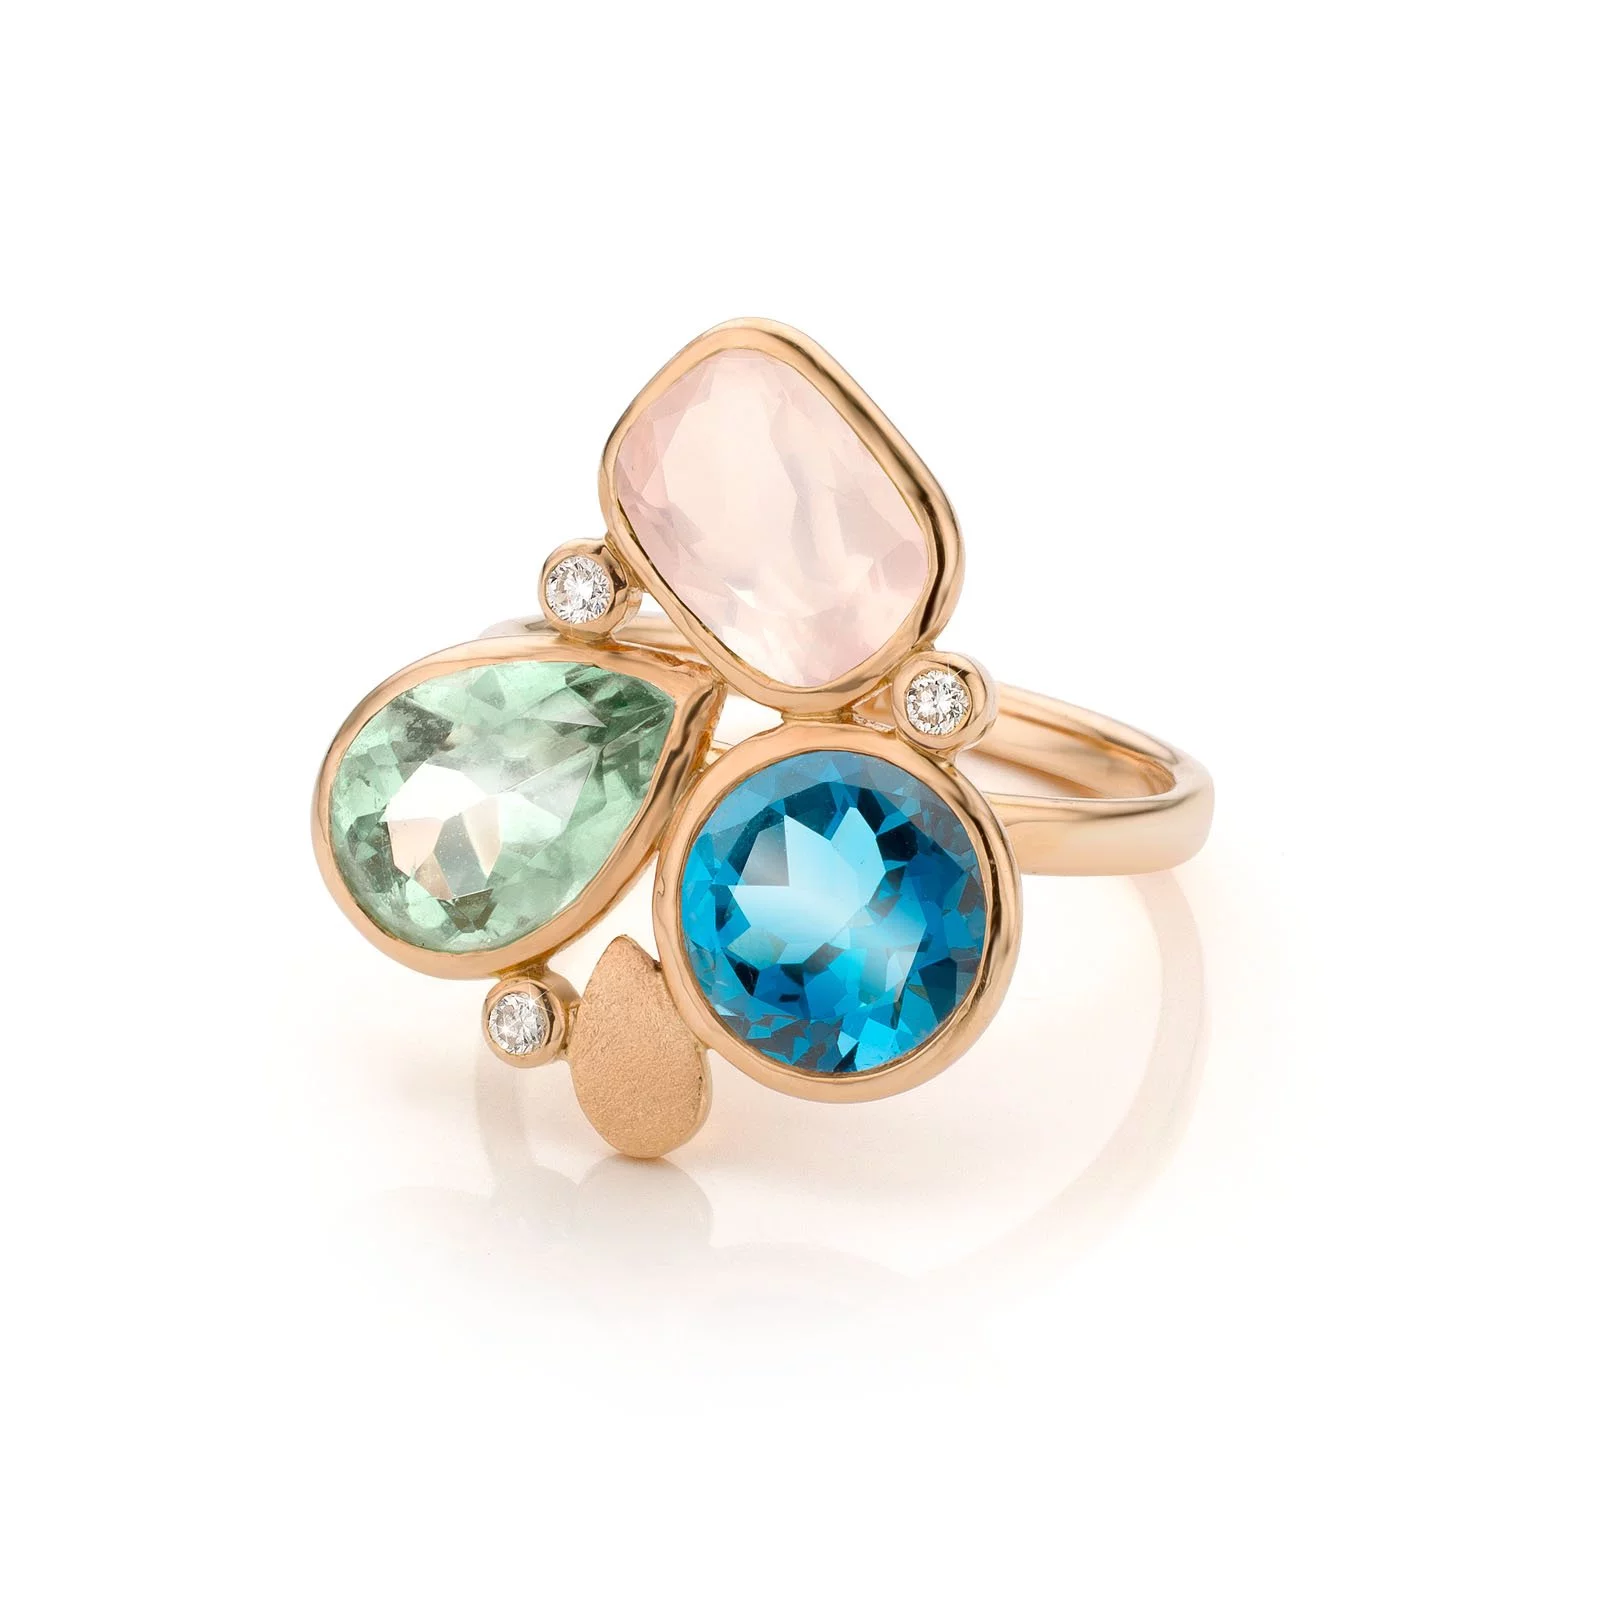 Audrey Huet Joaillerie : Ring N°3 colored and natural stones for elegant women with character MADE in Belgium